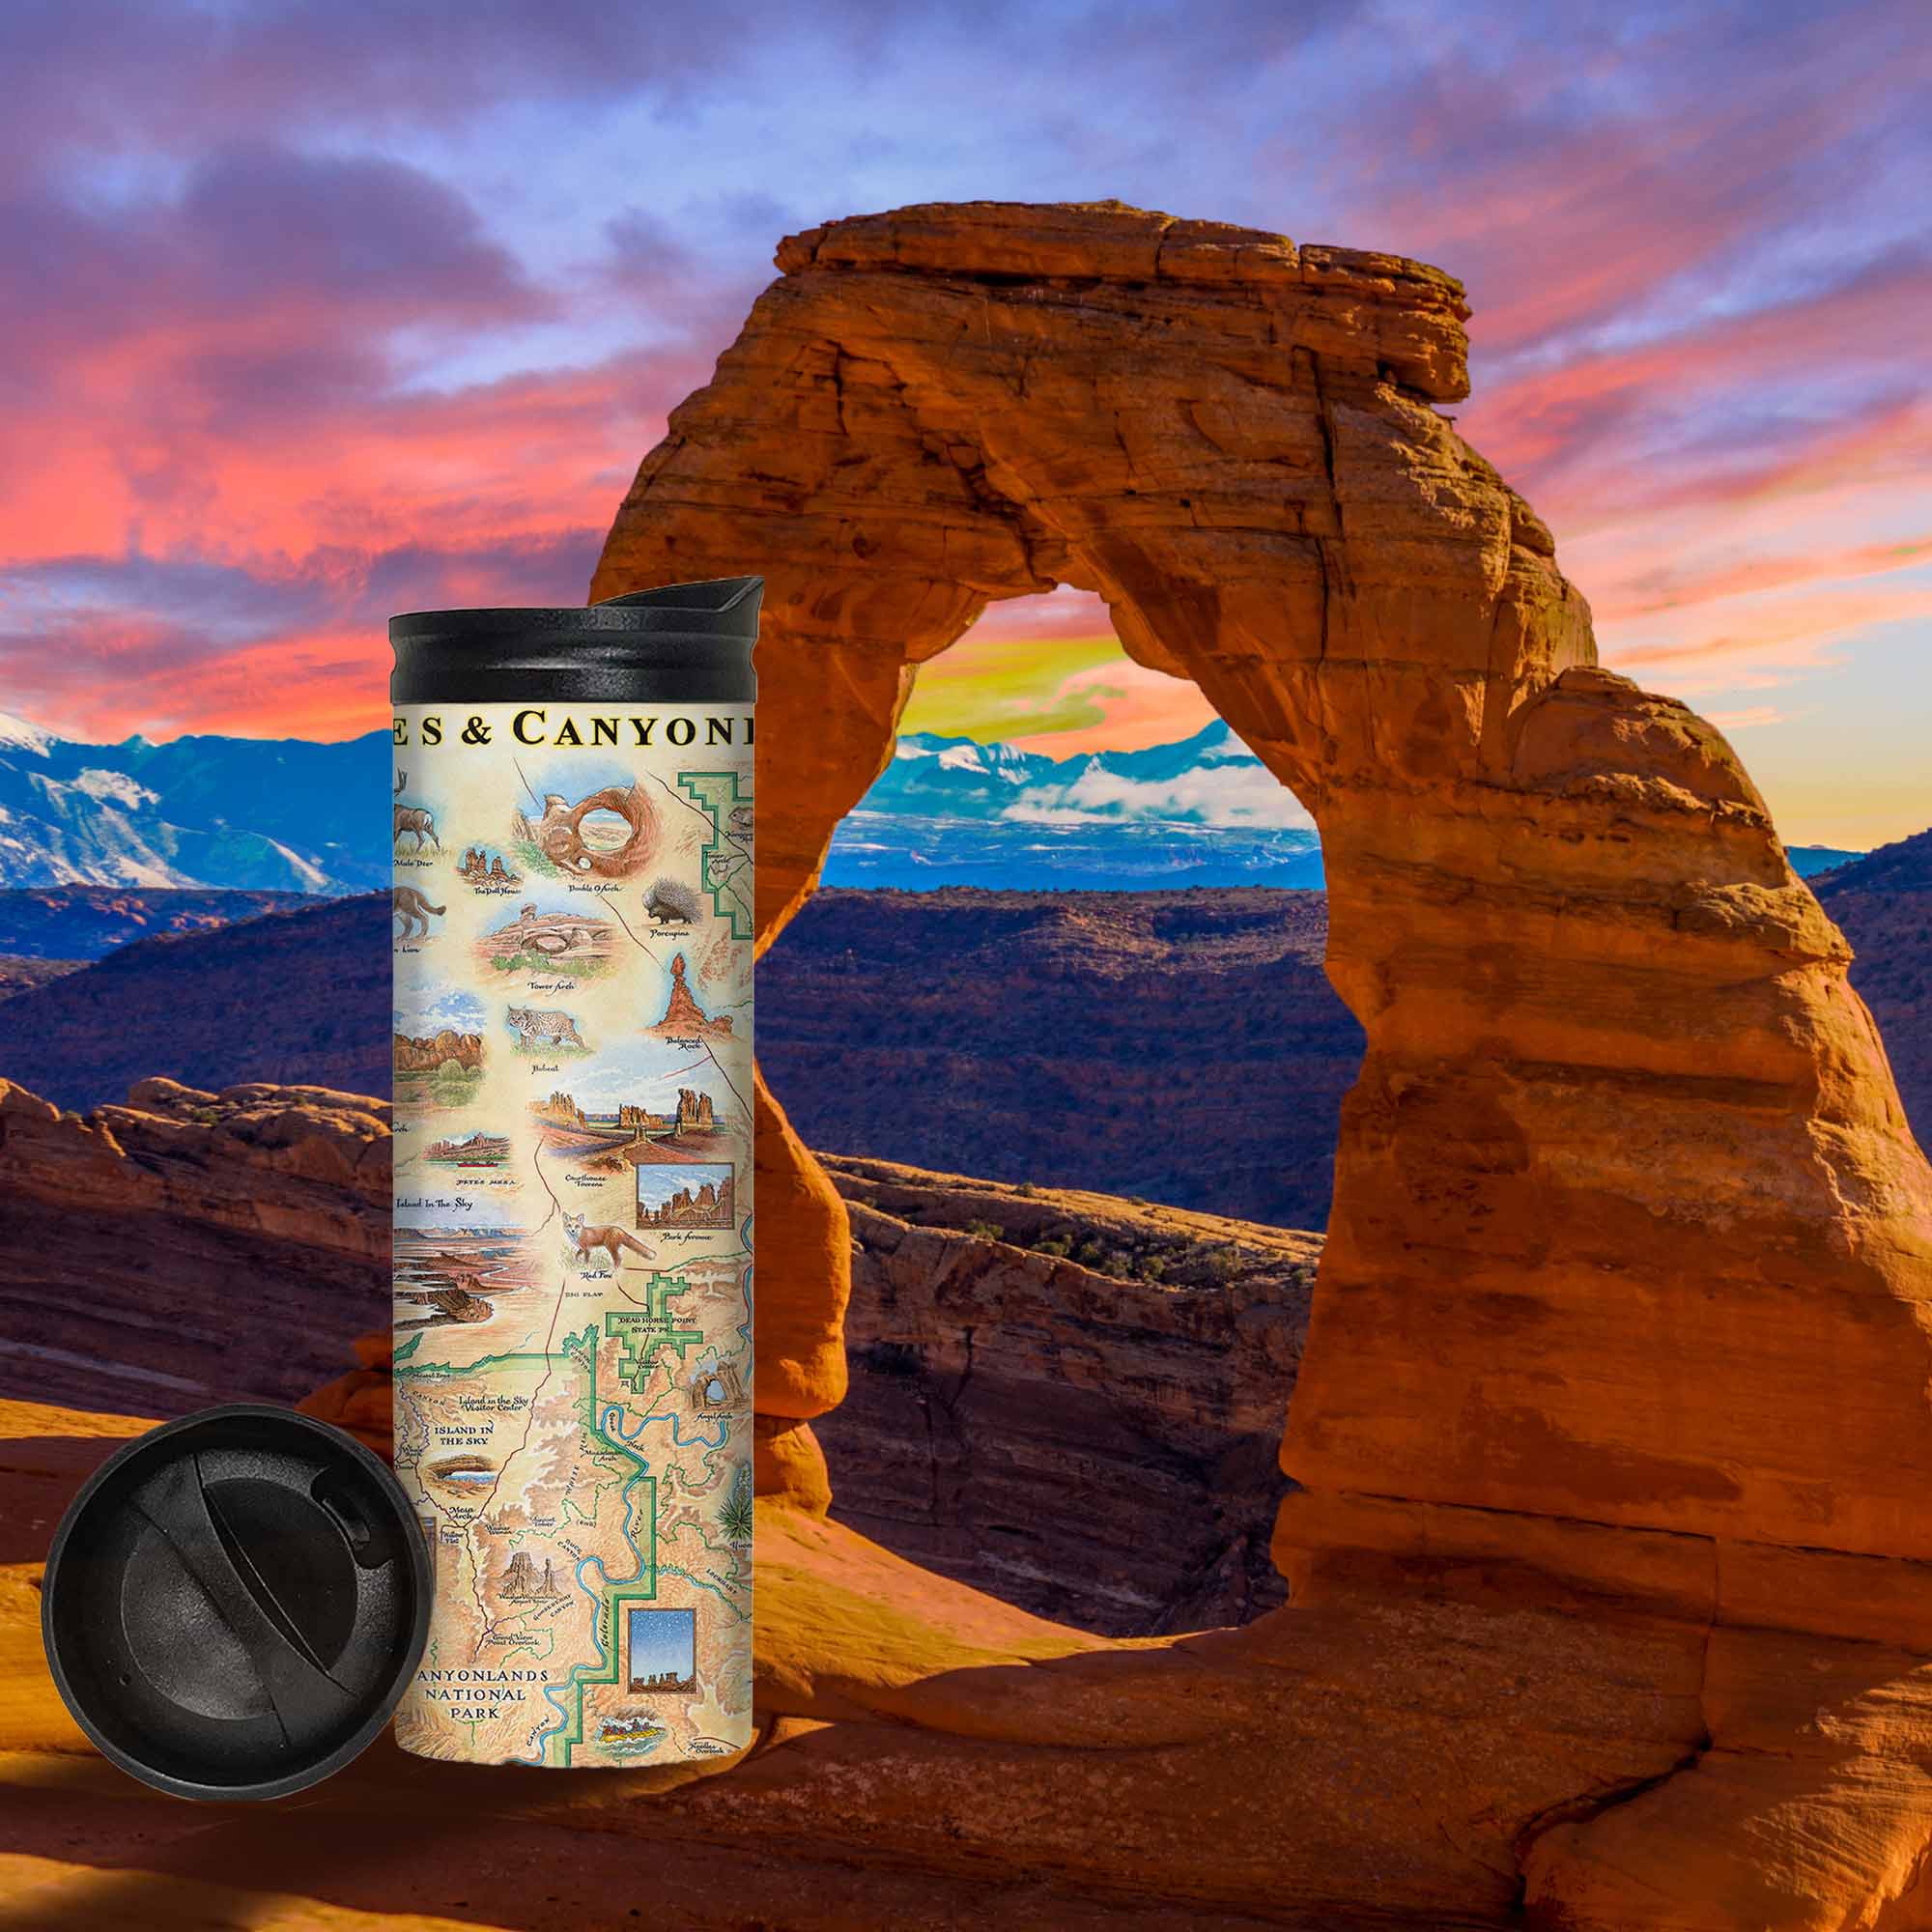 Utah's Arches & Canyonlands National Parks Map Travel Drinkware - 16 oz sitting in front of Delicate Arch during a sunset or sunrise. Utah's Arches & Canyonlands National Parks map travel Drinkware in earth tone colors of blues and greens. The map features deer, mountain lion, porcupine, bobcats, and a fox. Landmarks are Tower Arch Delicate Arch, Double O Arch, Balanced Rock, Island in the Sky, and Fiery Furnace. 